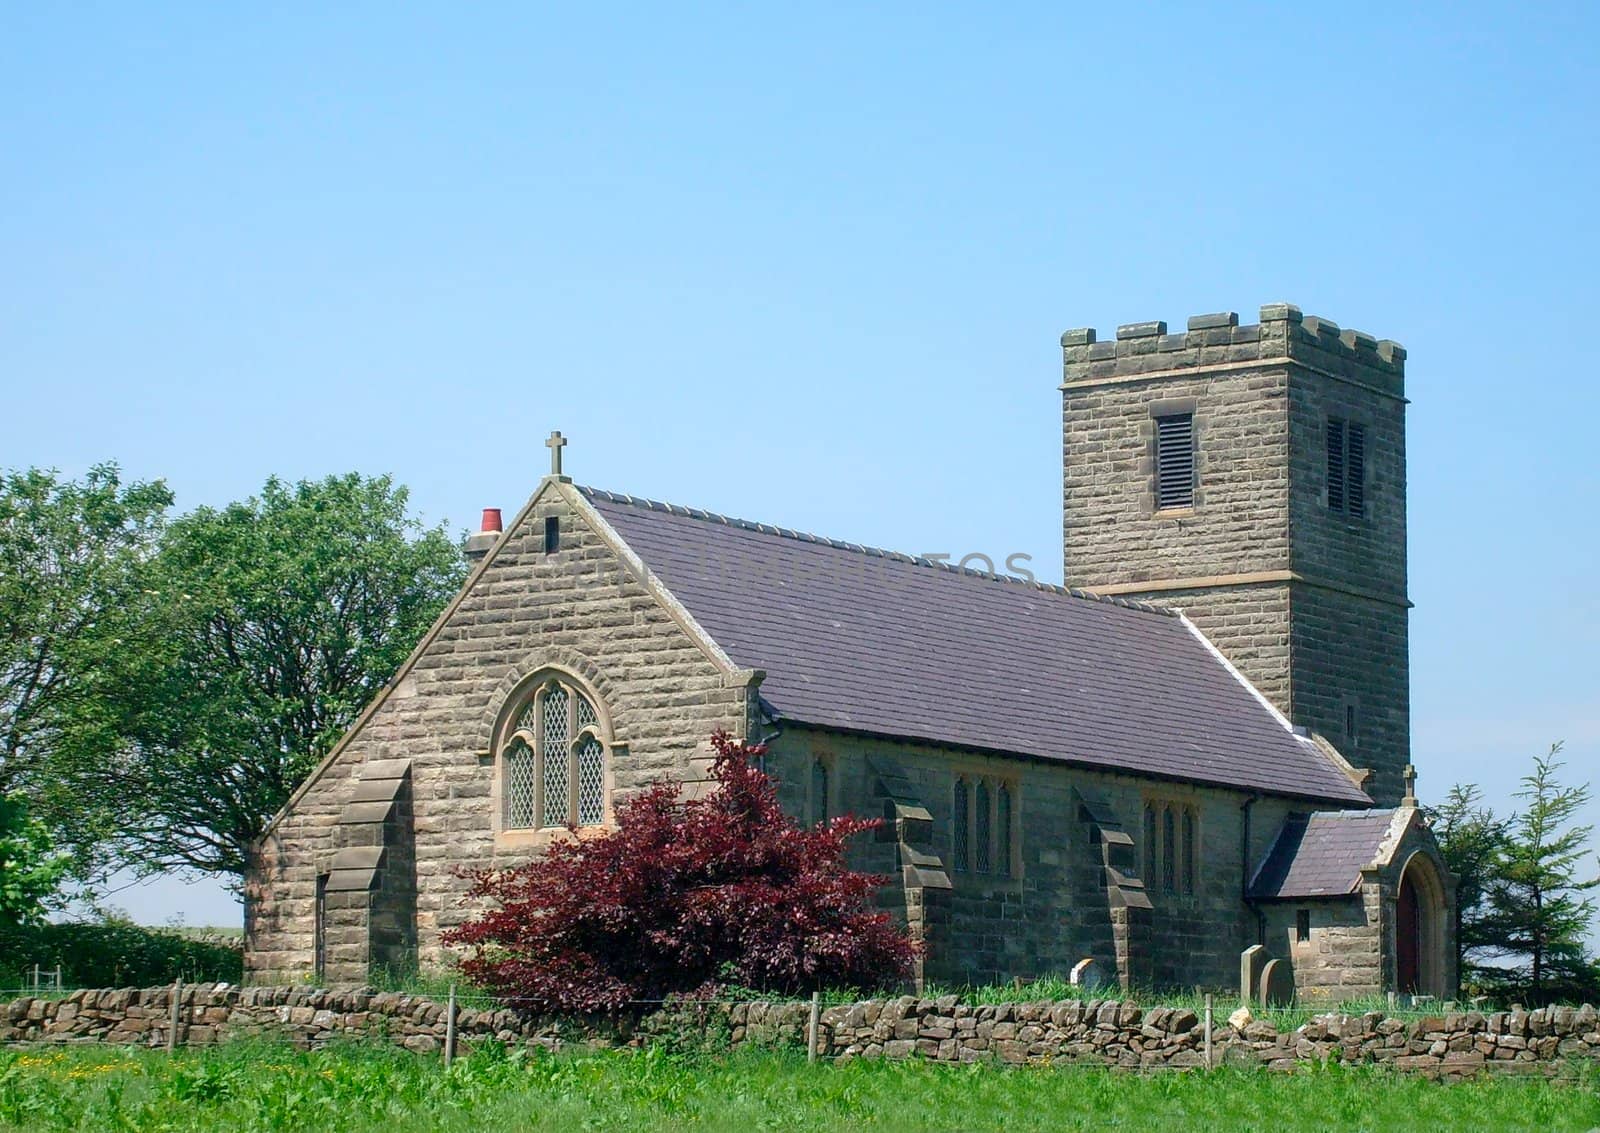 Church in countryside scene, Yorkshire Dales, England.